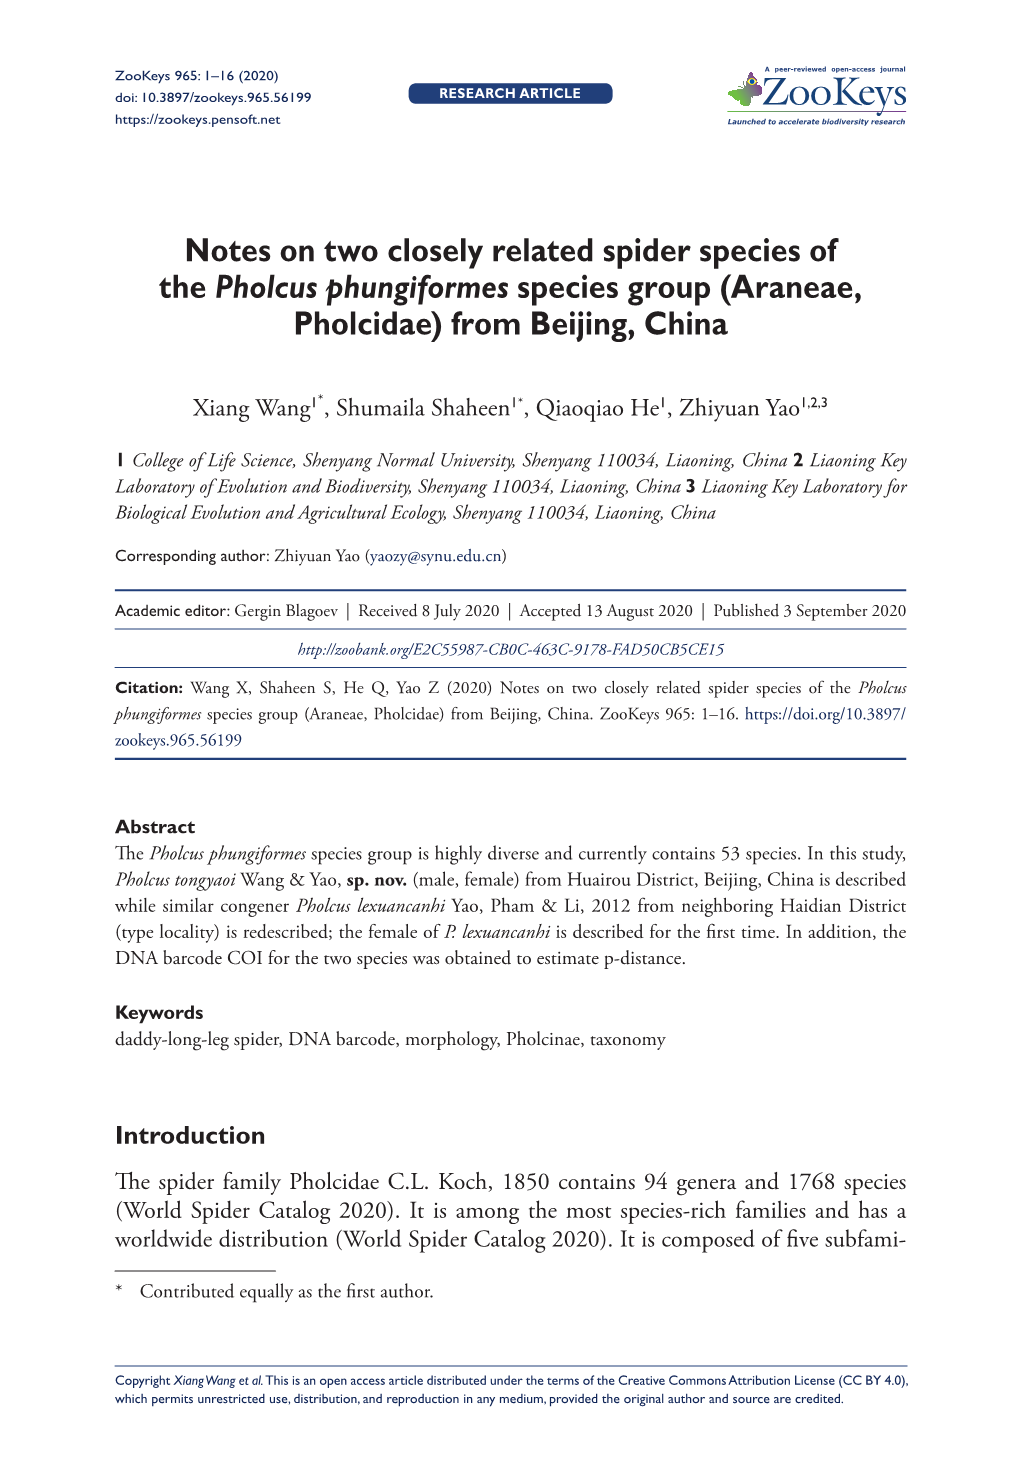 Notes on Two Closely Related Spider Species of the Pholcus Phungiformes Species Group (Araneae, Pholcidae) from Beijing, China